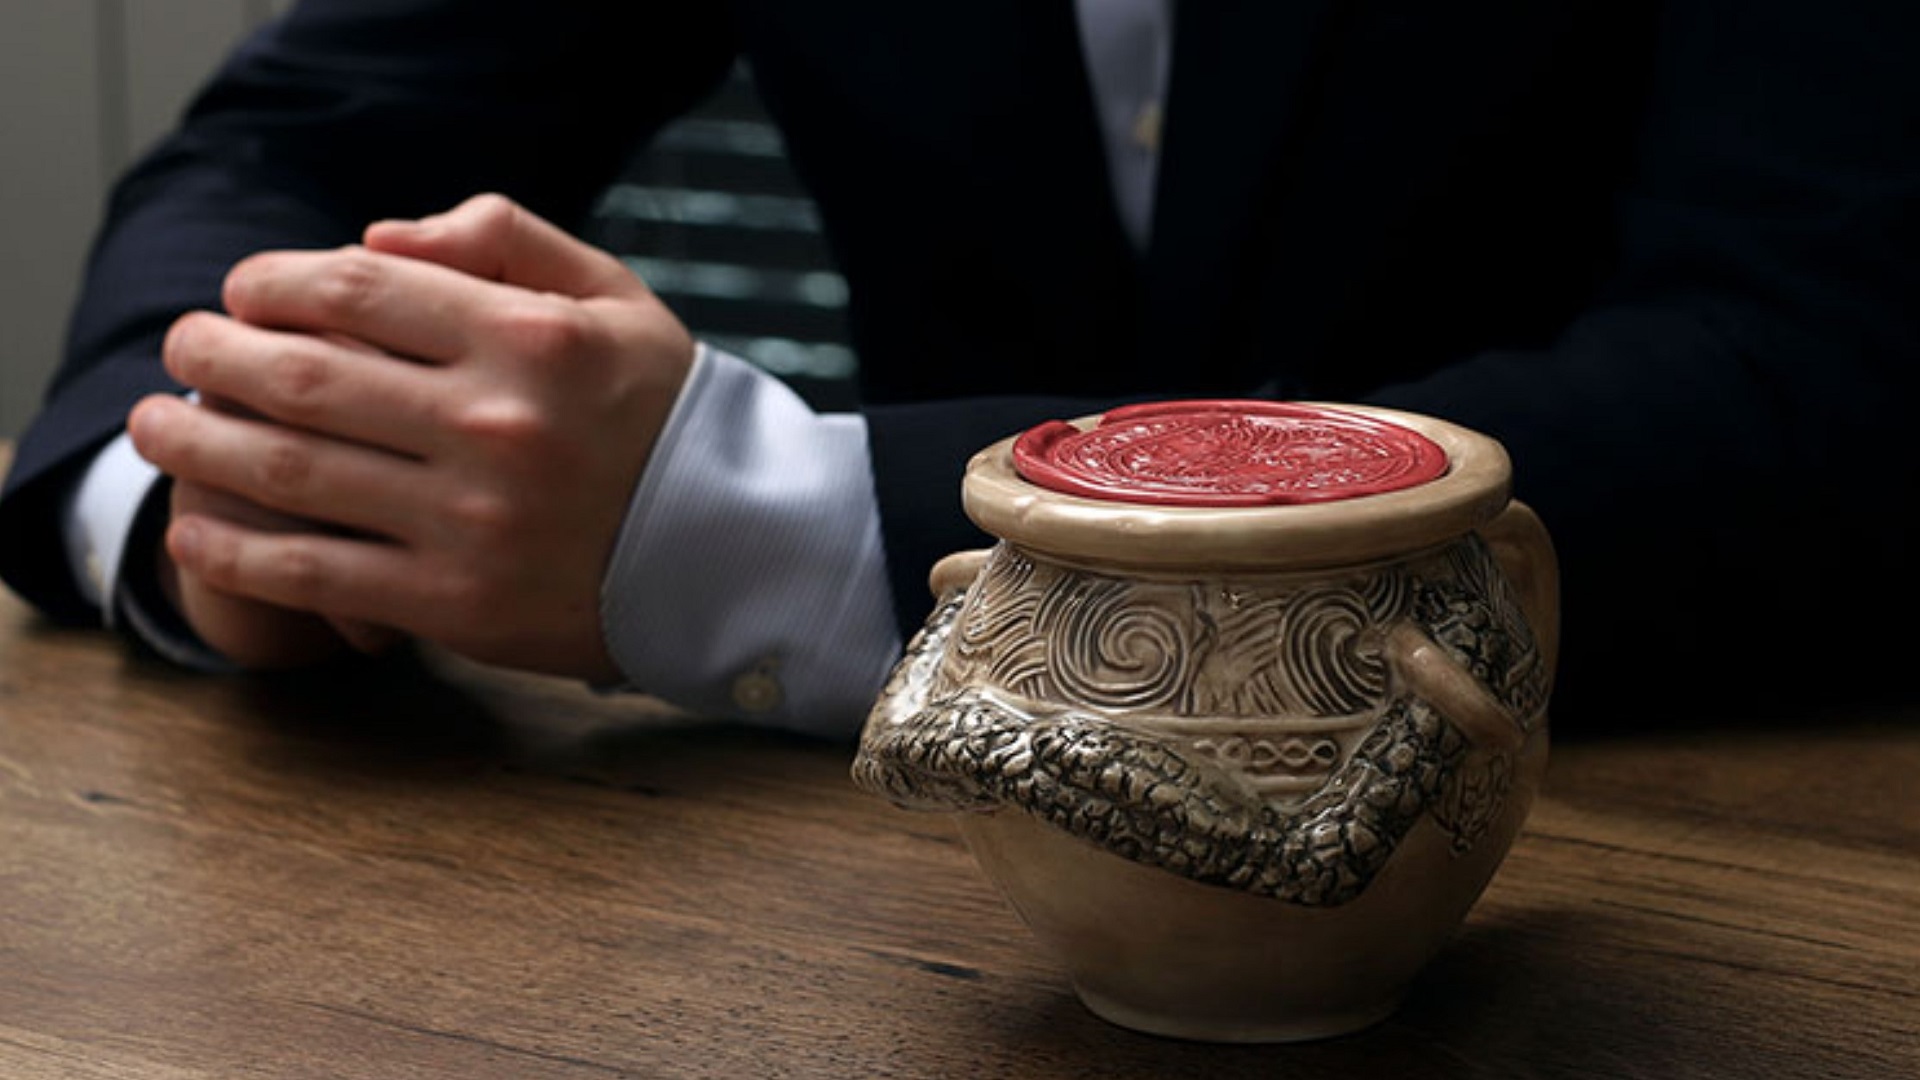 A Japanese company is making an adorable Elden Ring warrior jar mug just in time for everyone to get really freaked out by their new lore in the DLC